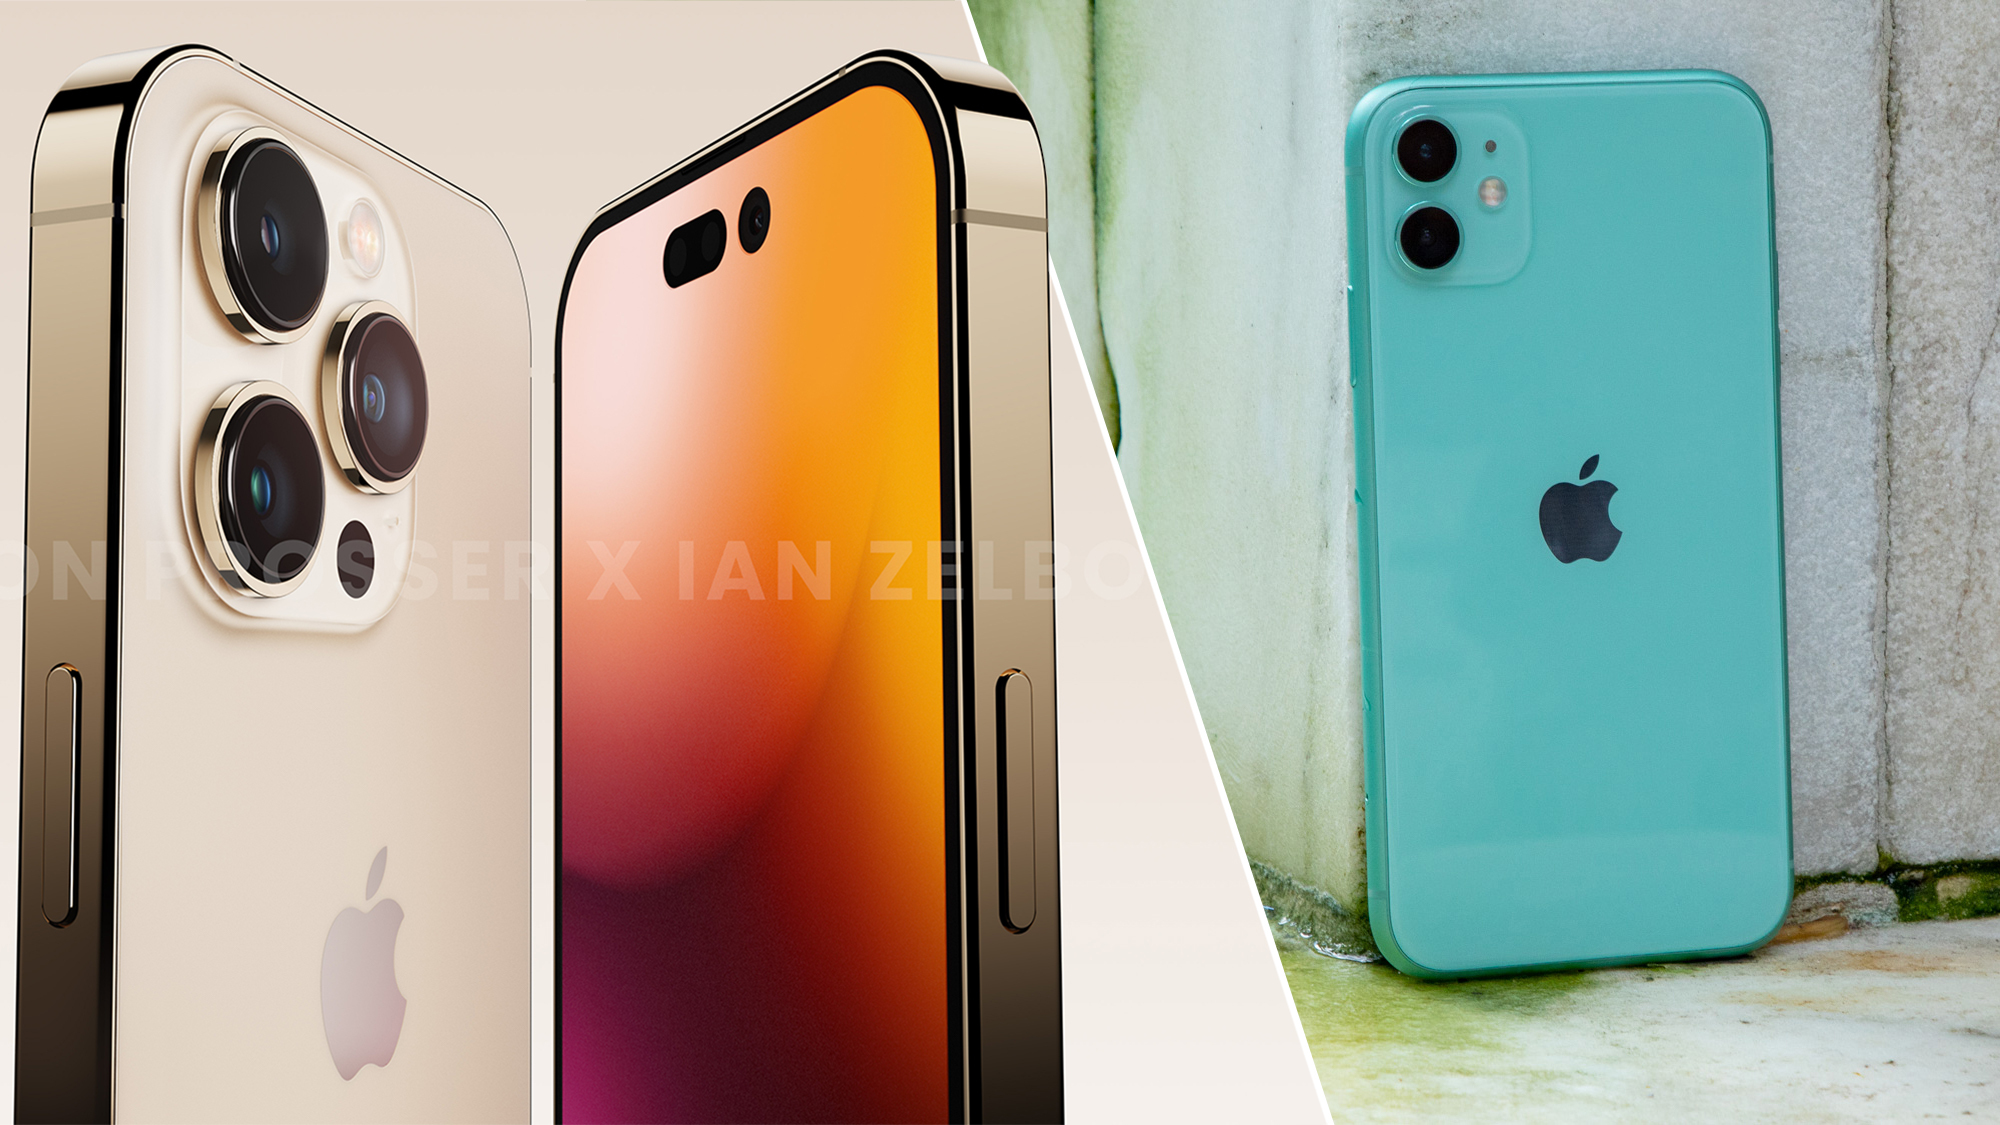 A split image of the rumored iPhone 14 Pro design and a real-life image of the iPhone 11